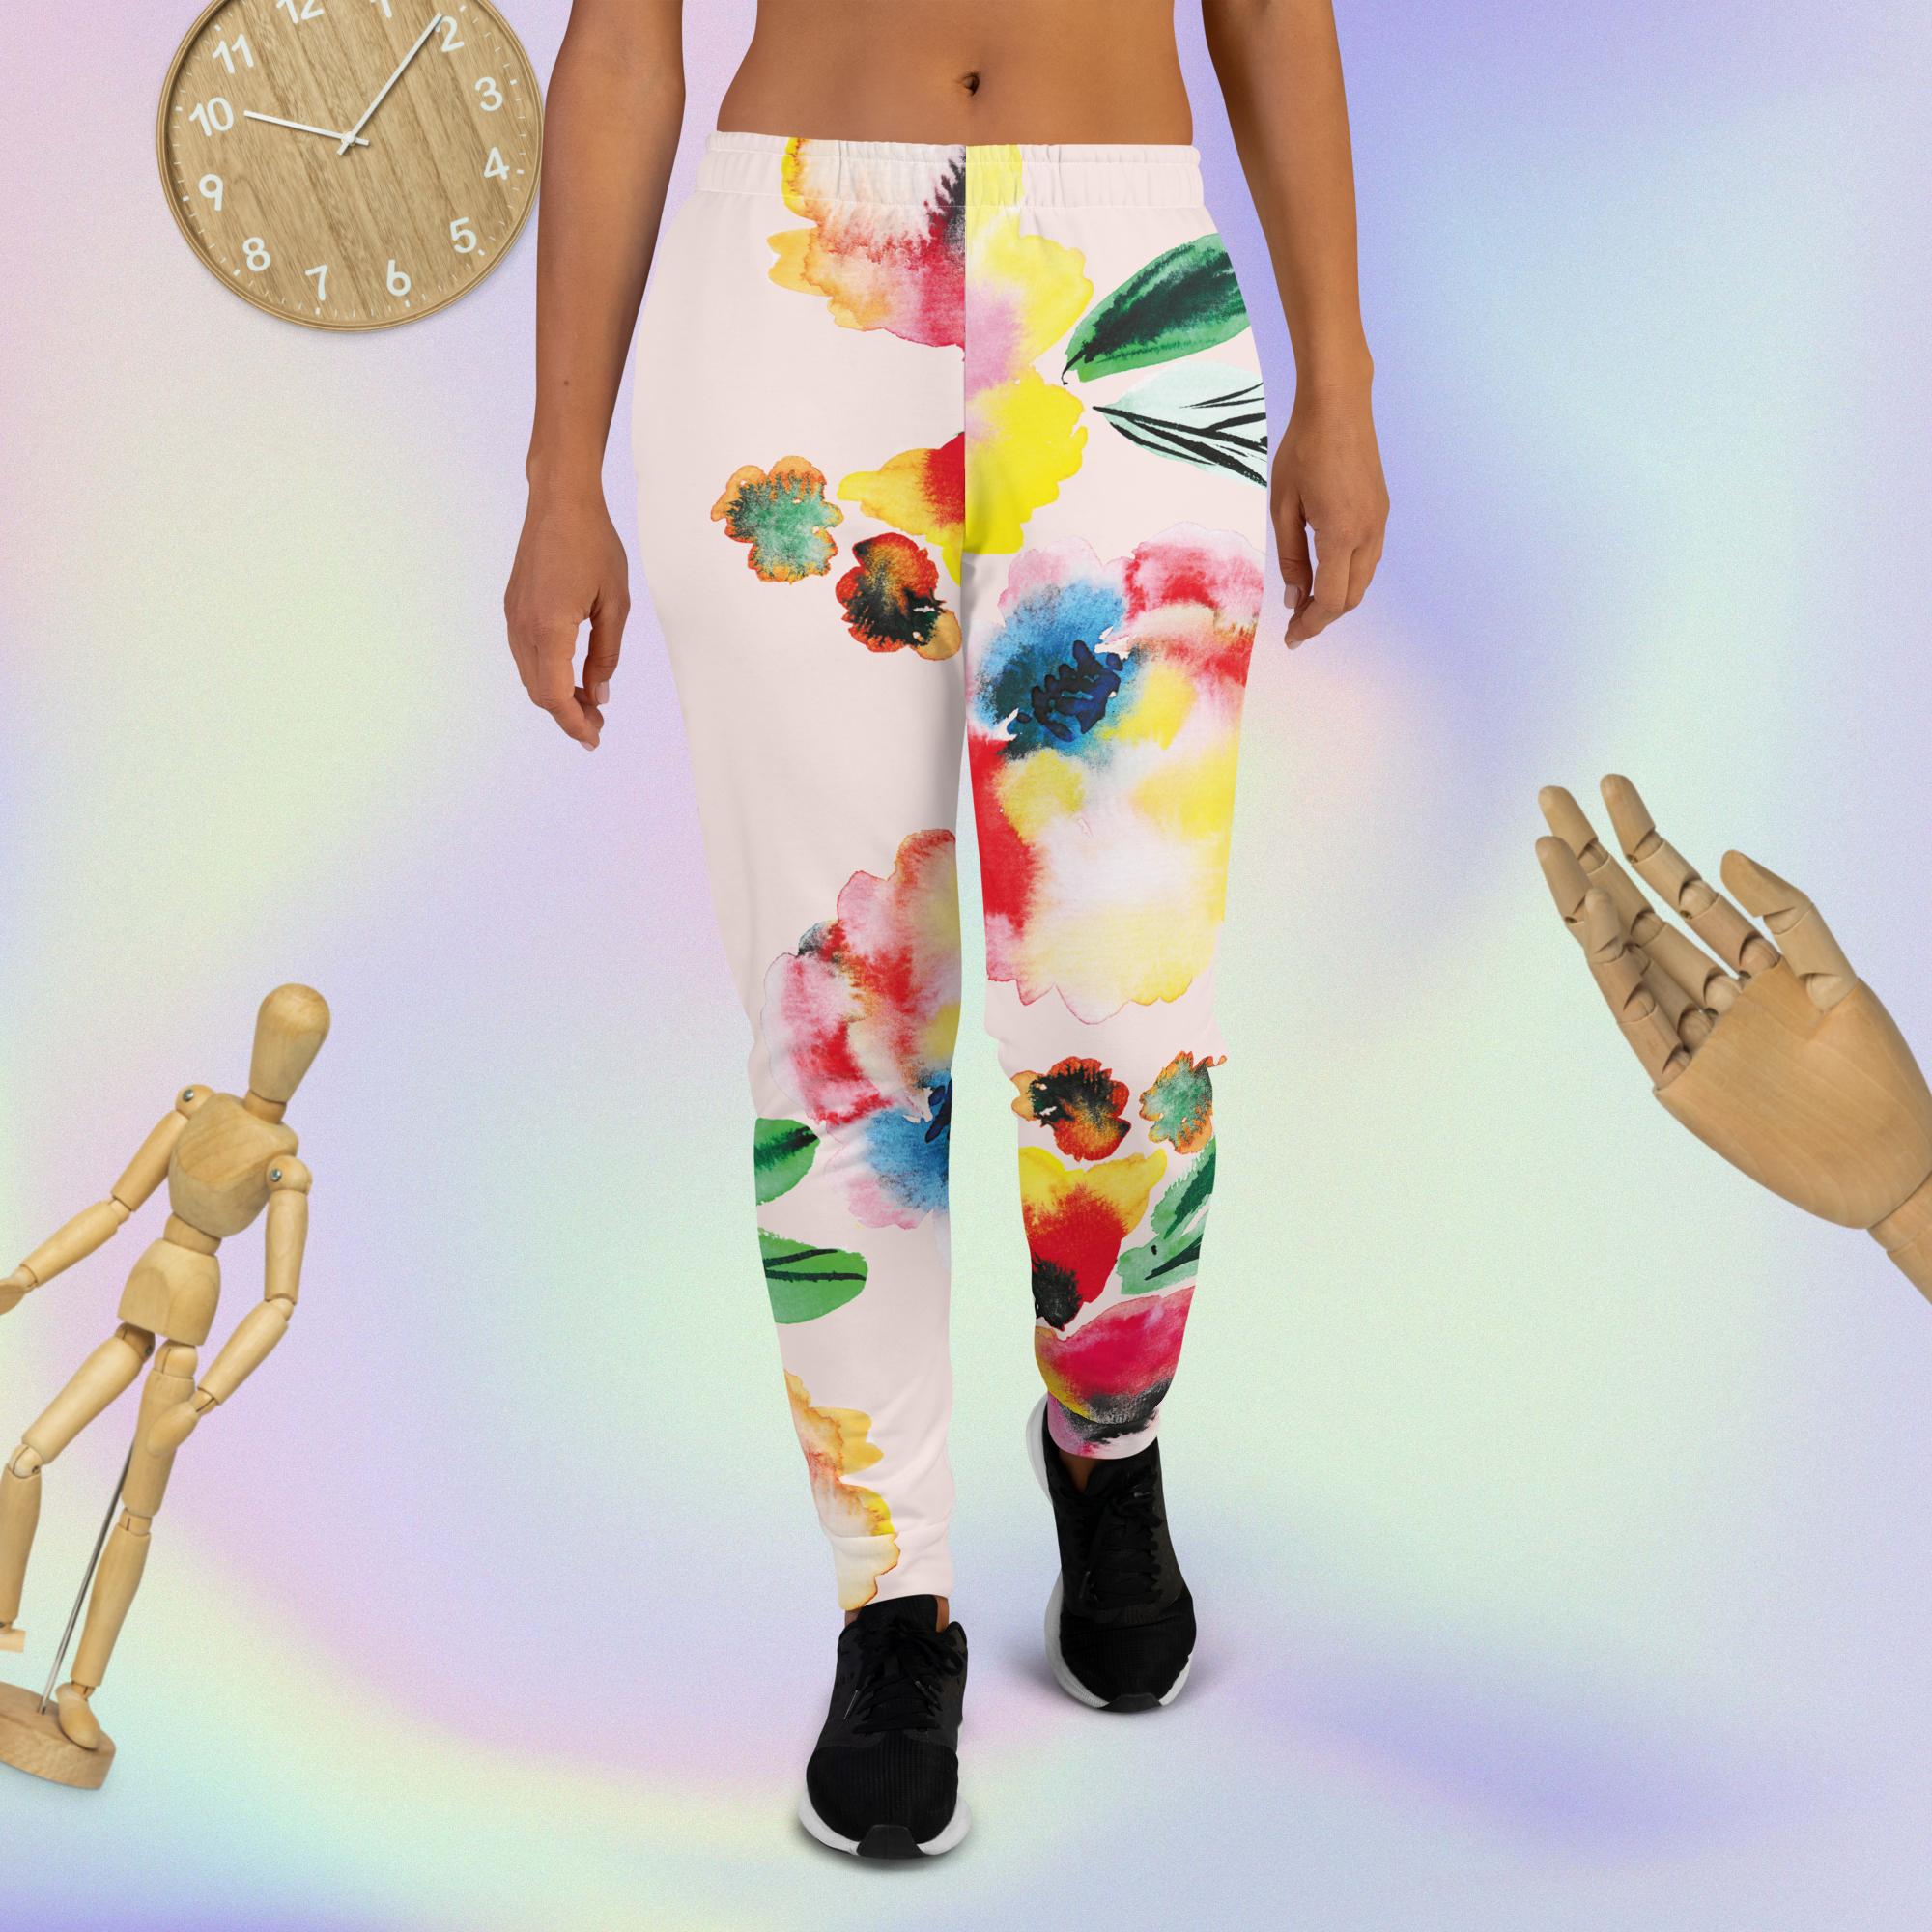 https://assets.bigcartel.com/product_images/76e7fbd4-81f6-4e33-b132-469a42691e22/all-over-print-recycled-womens-joggers-white-front-650f27c575cb1.jpg?auto=format&fit=max&w=2000